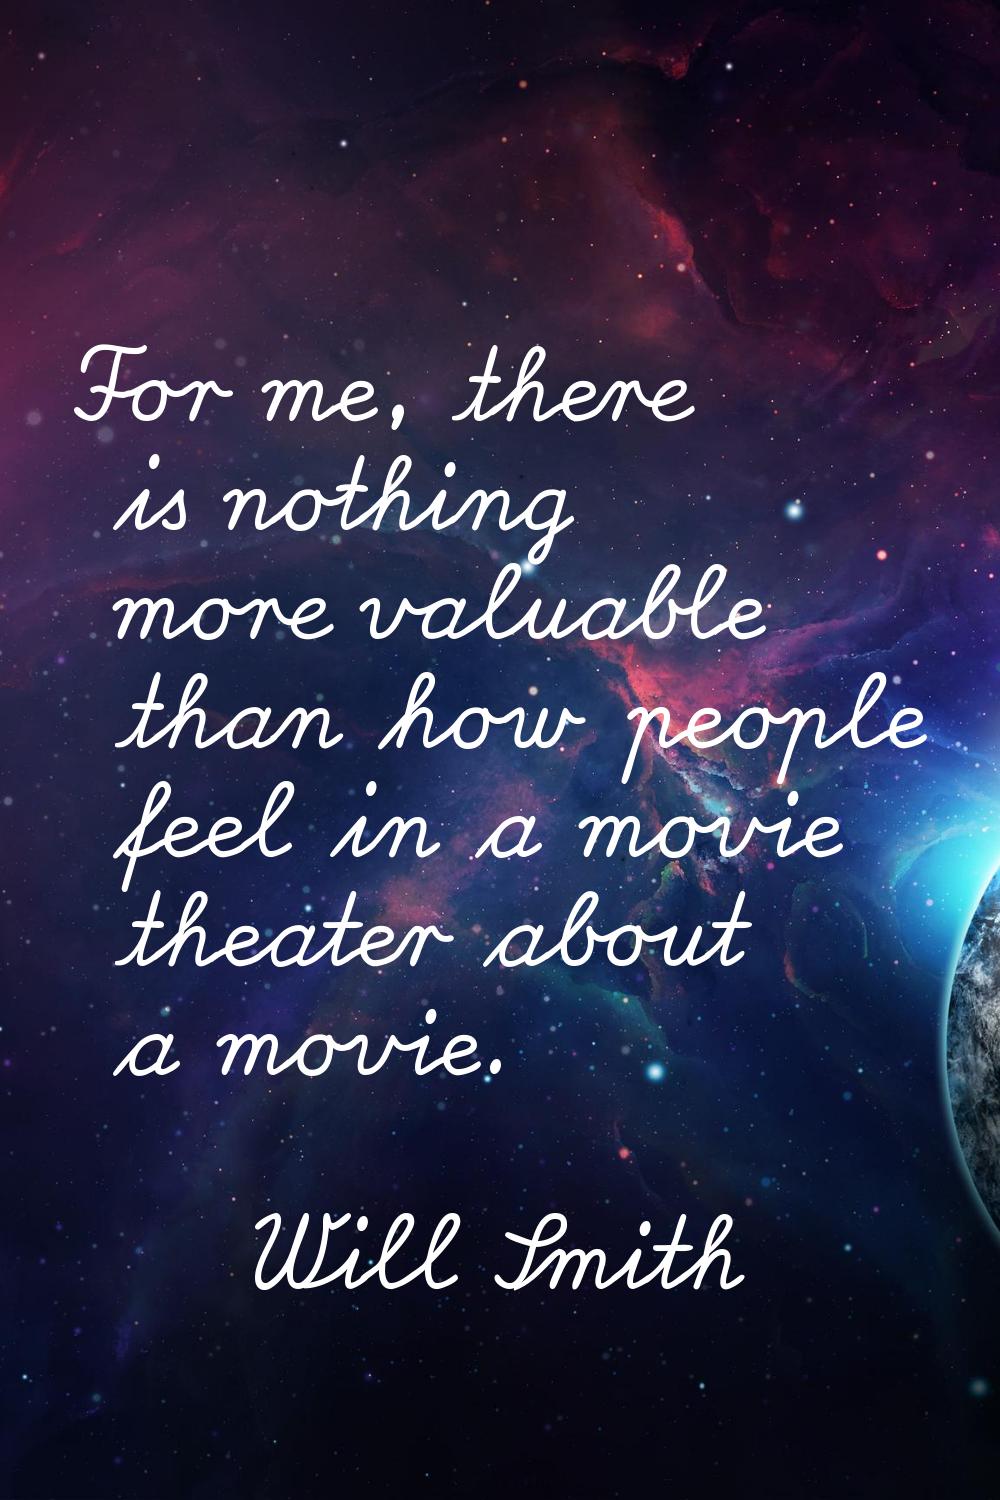 For me, there is nothing more valuable than how people feel in a movie theater about a movie.